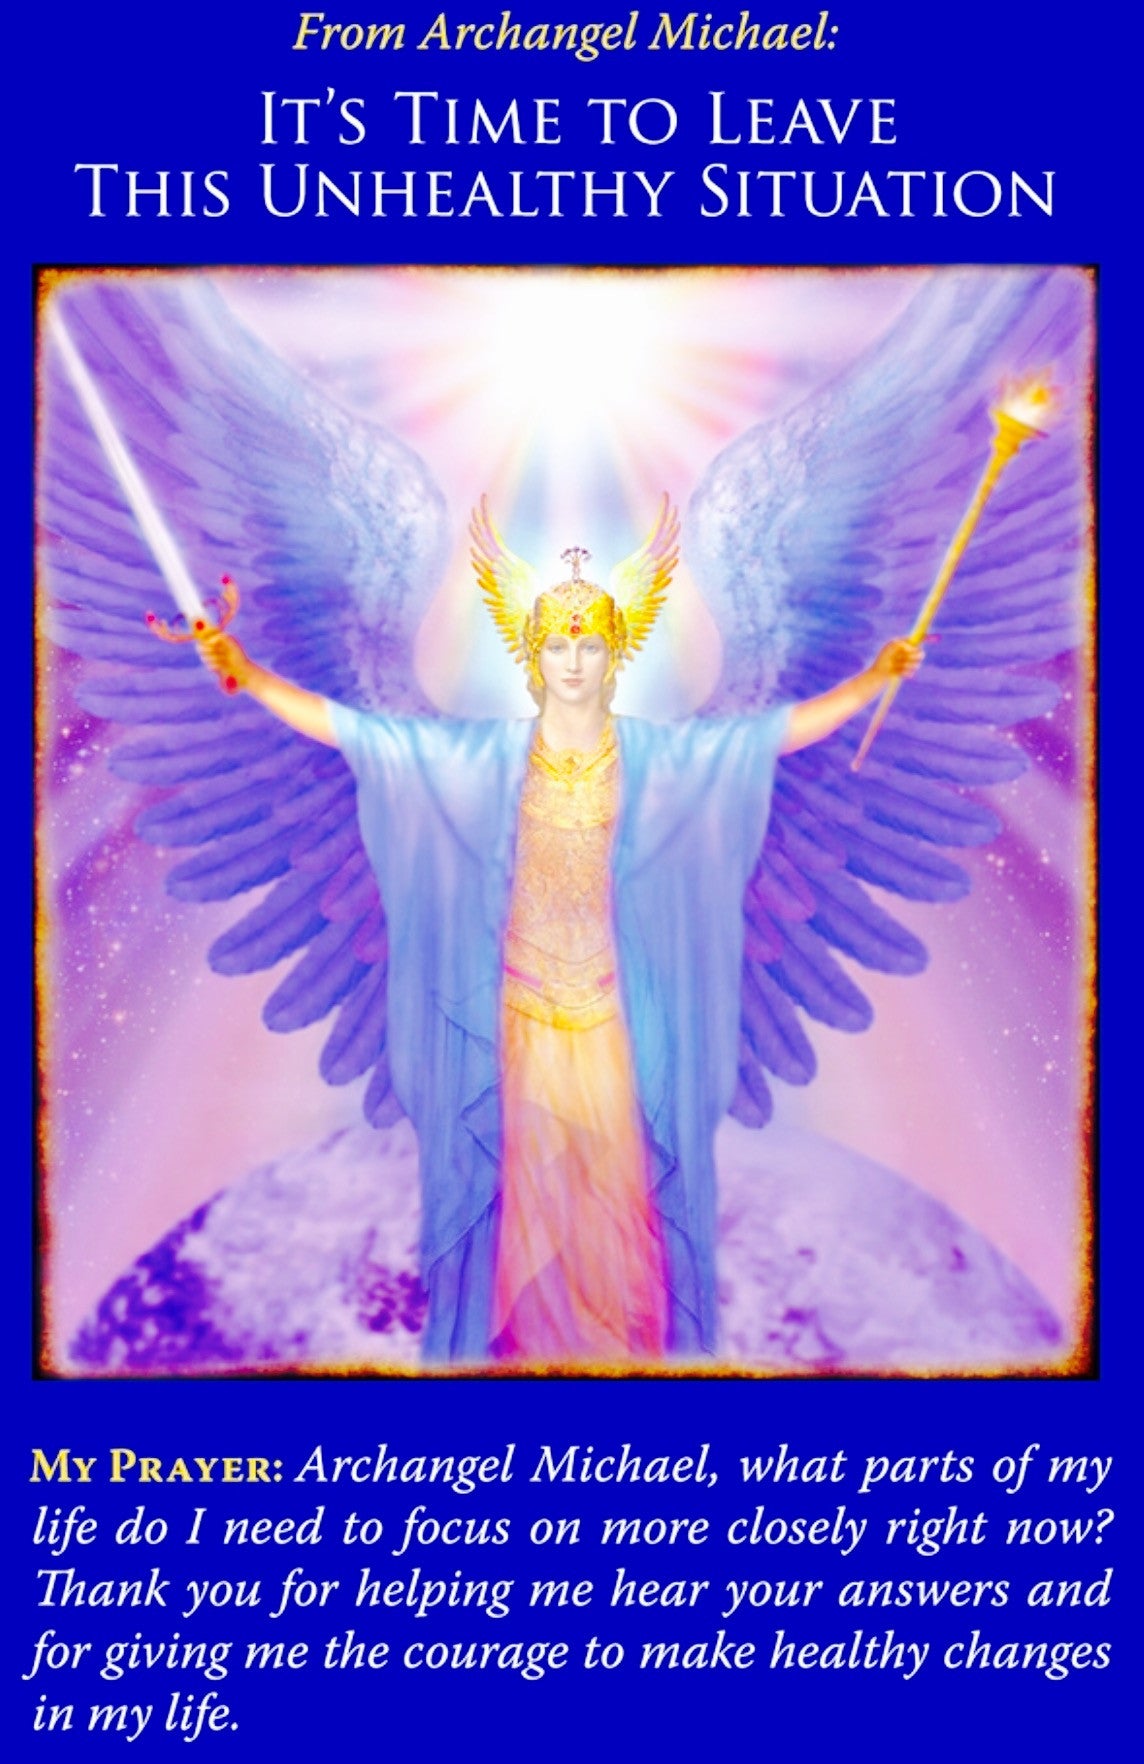 Message from Archangel Michael: It's time to leave this unhealthy situation.